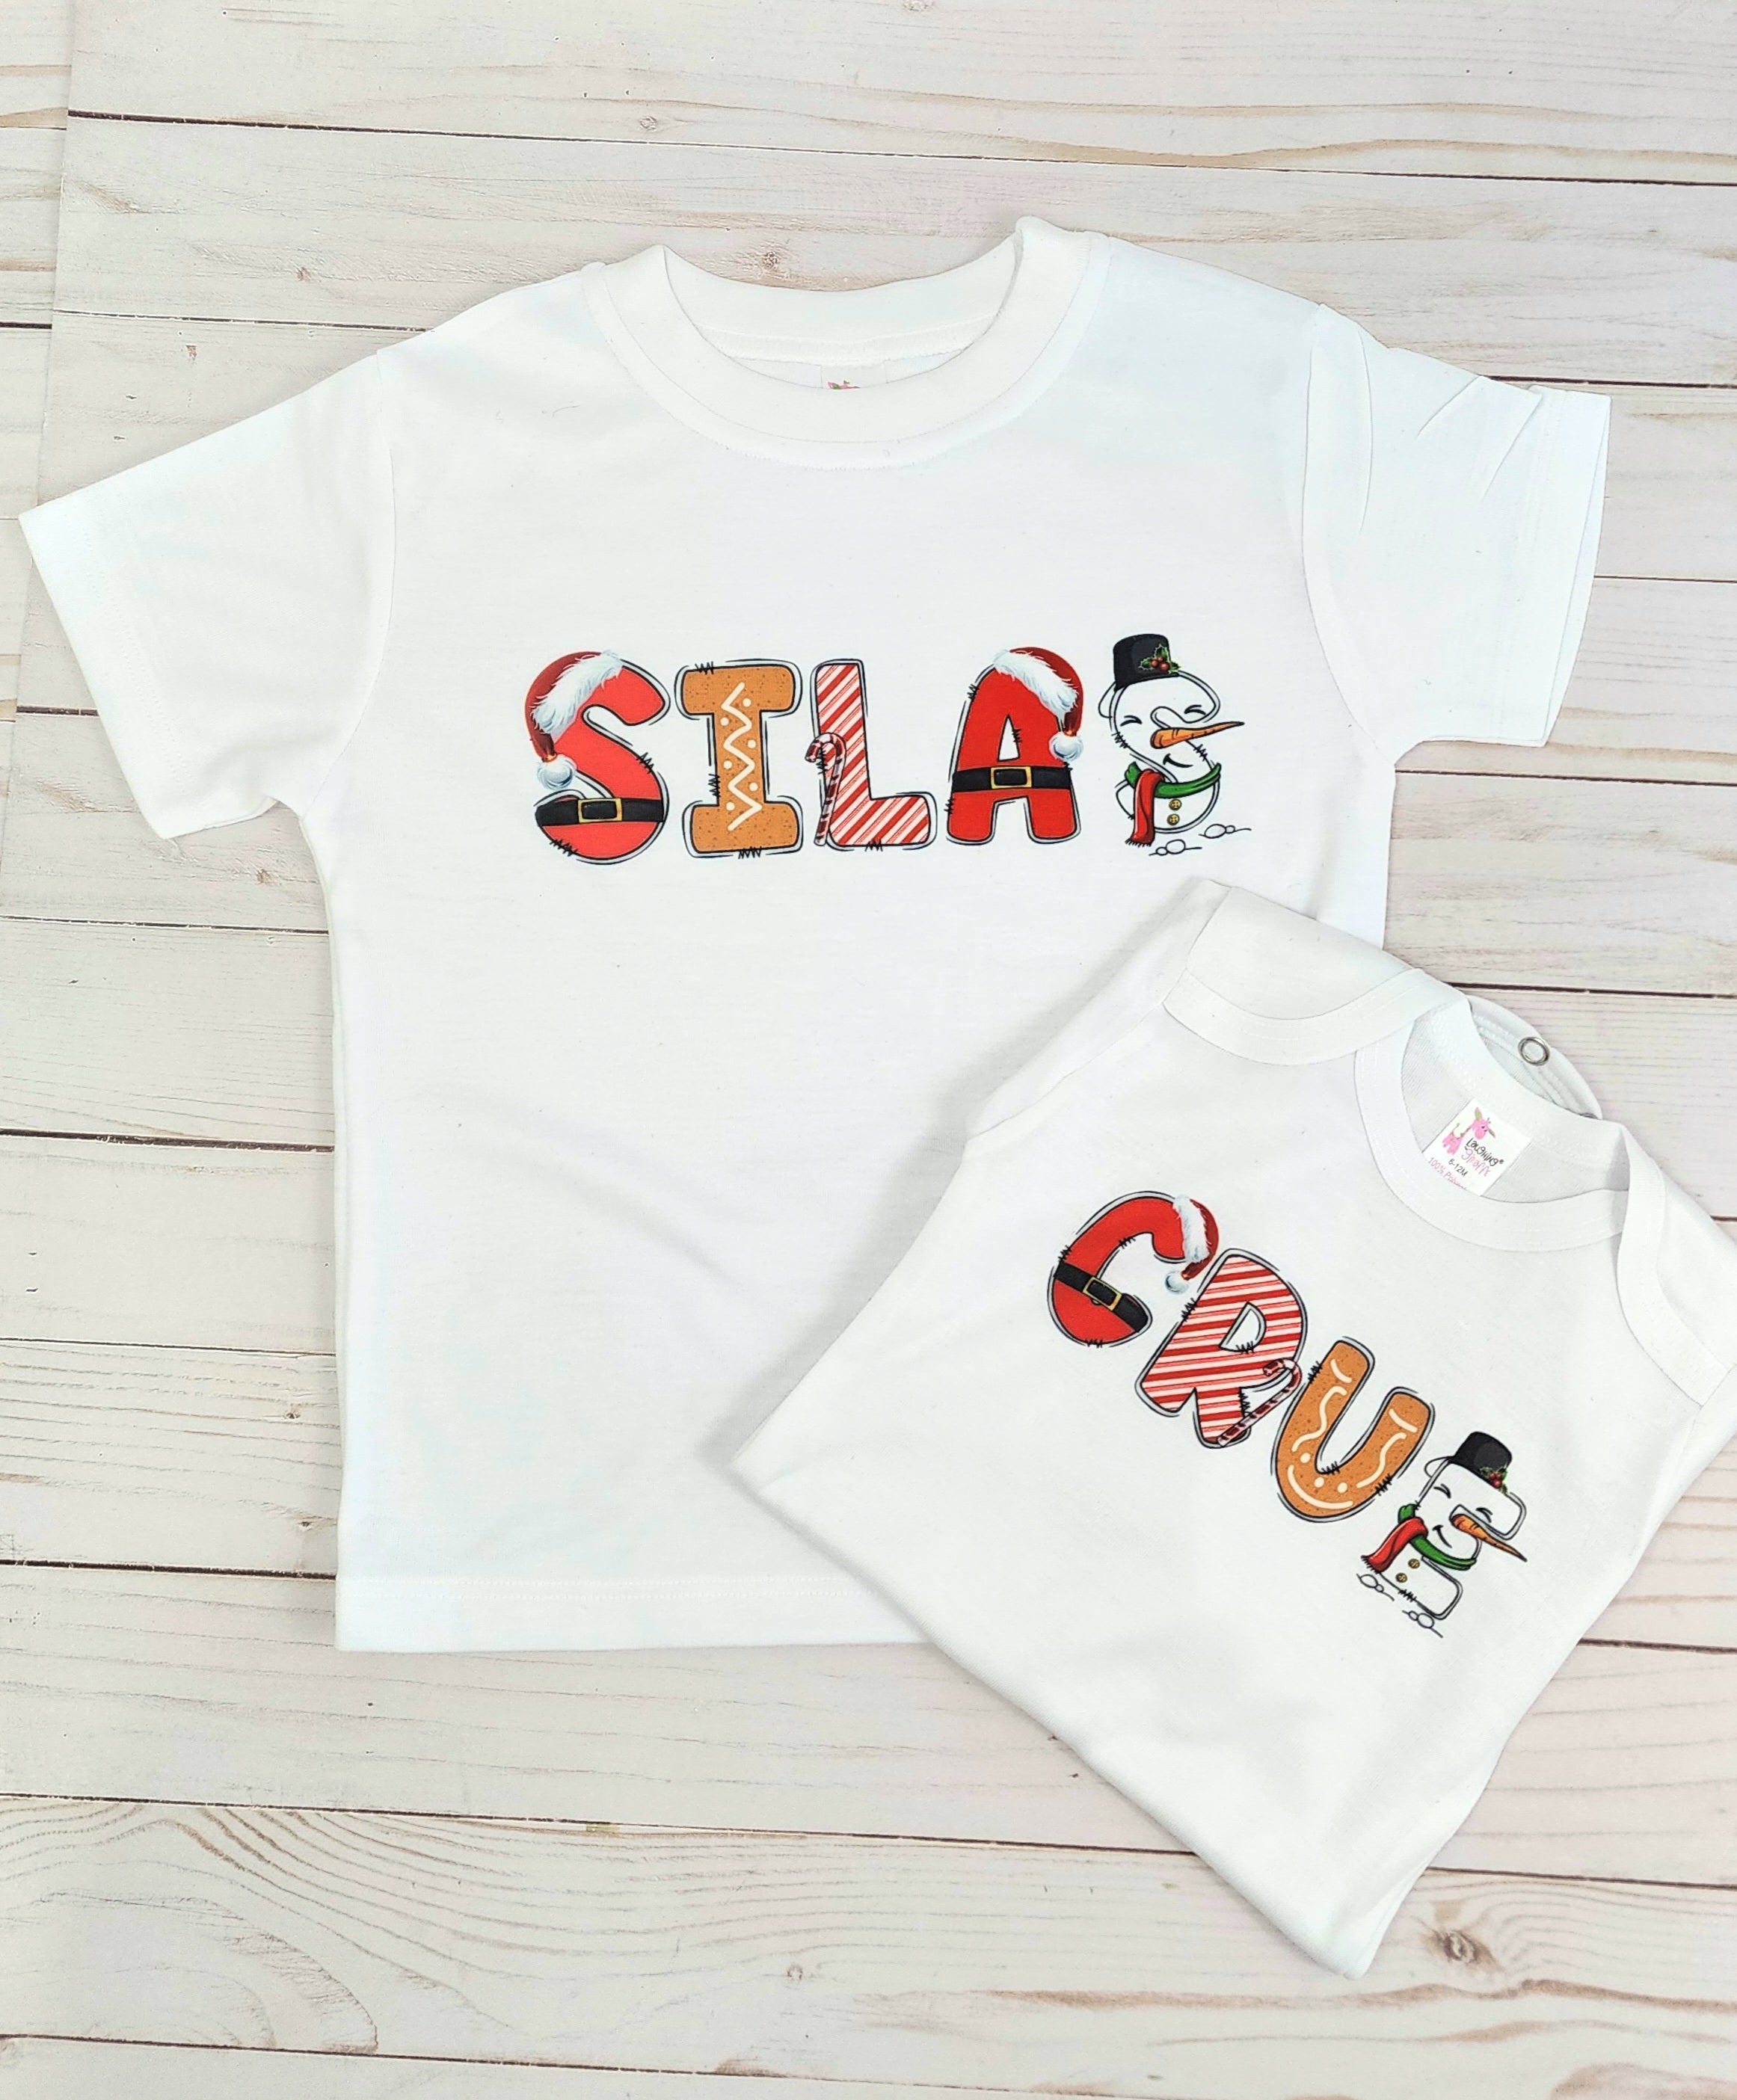 2 shirts with the name Silca and Crue . Each letter has a different character for example Santa S , Gingerbread I , Candy Cane L, Santa A, Snowman S  and it spells SILAS